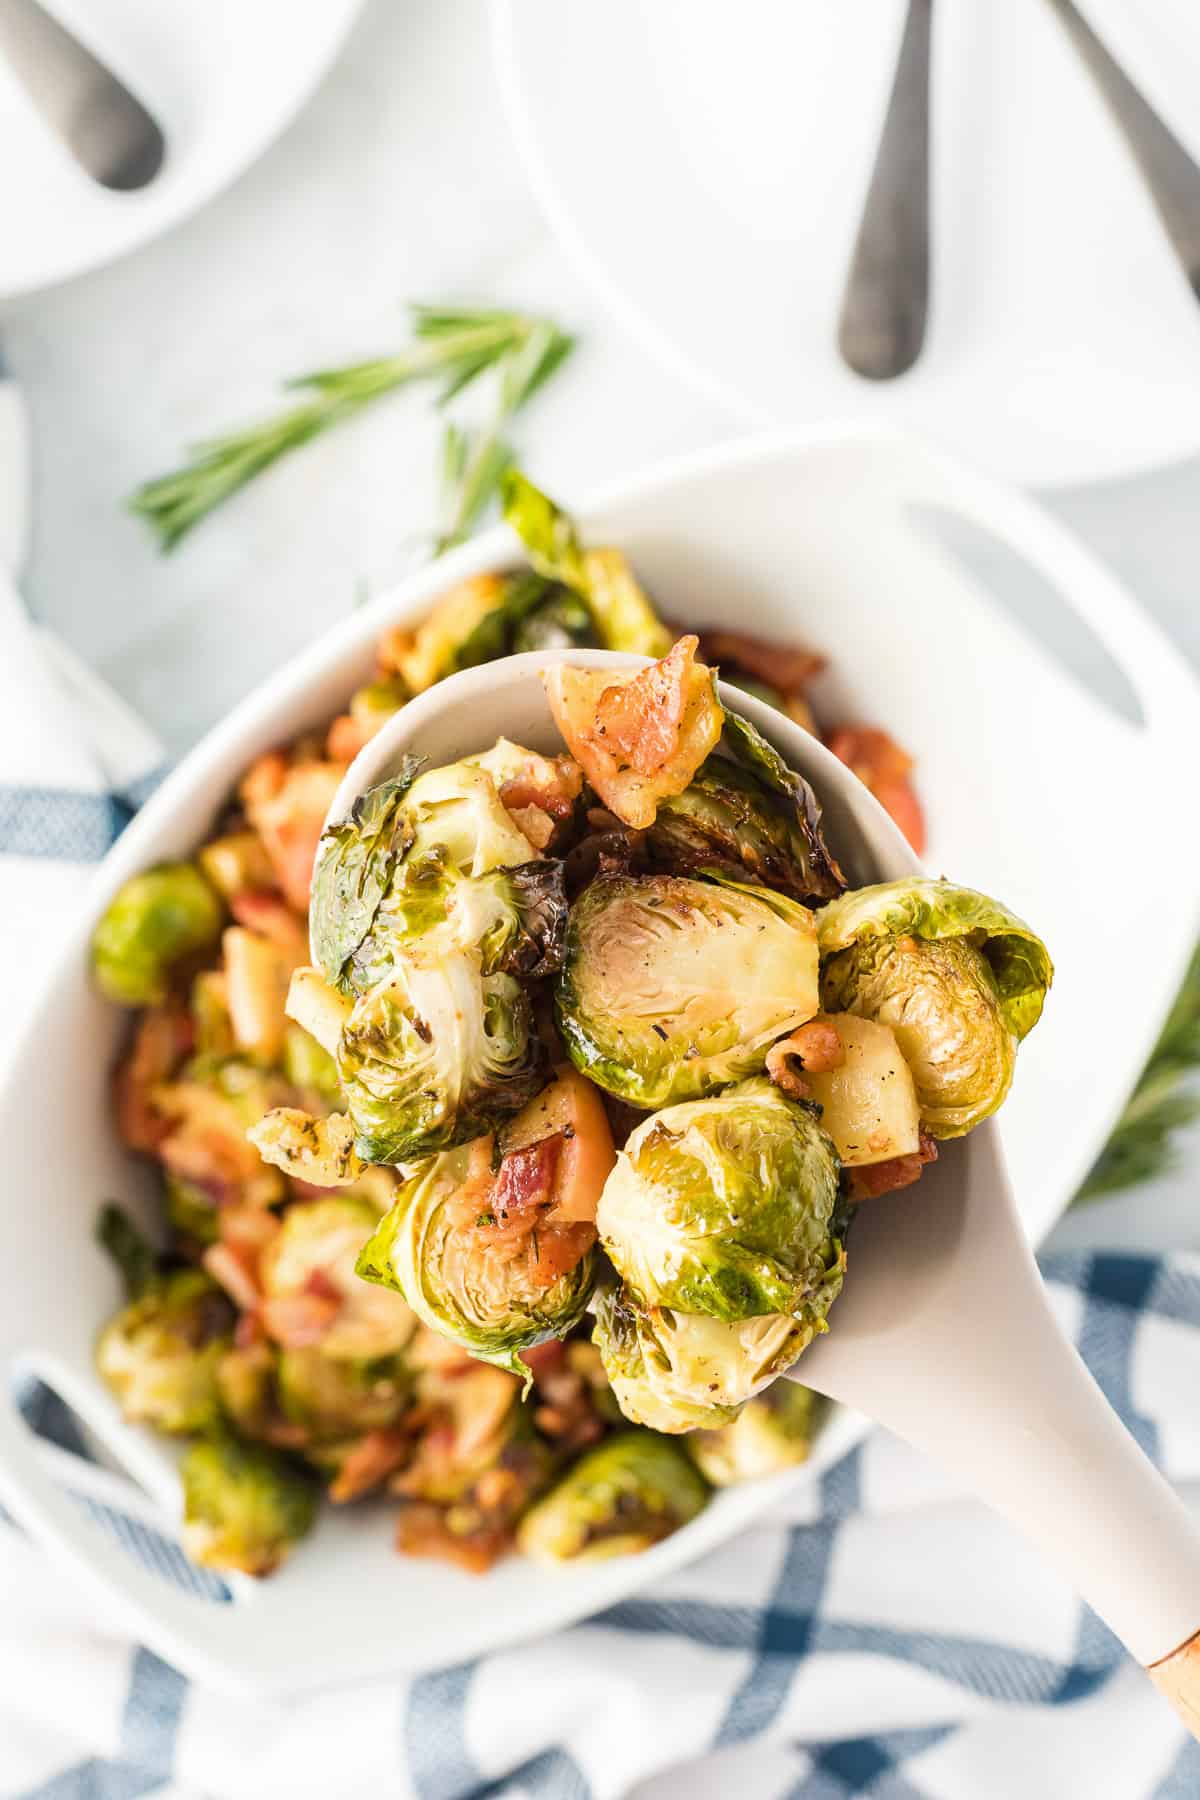 A serving spoon holding a large scoop of roasted brussels sprouts.